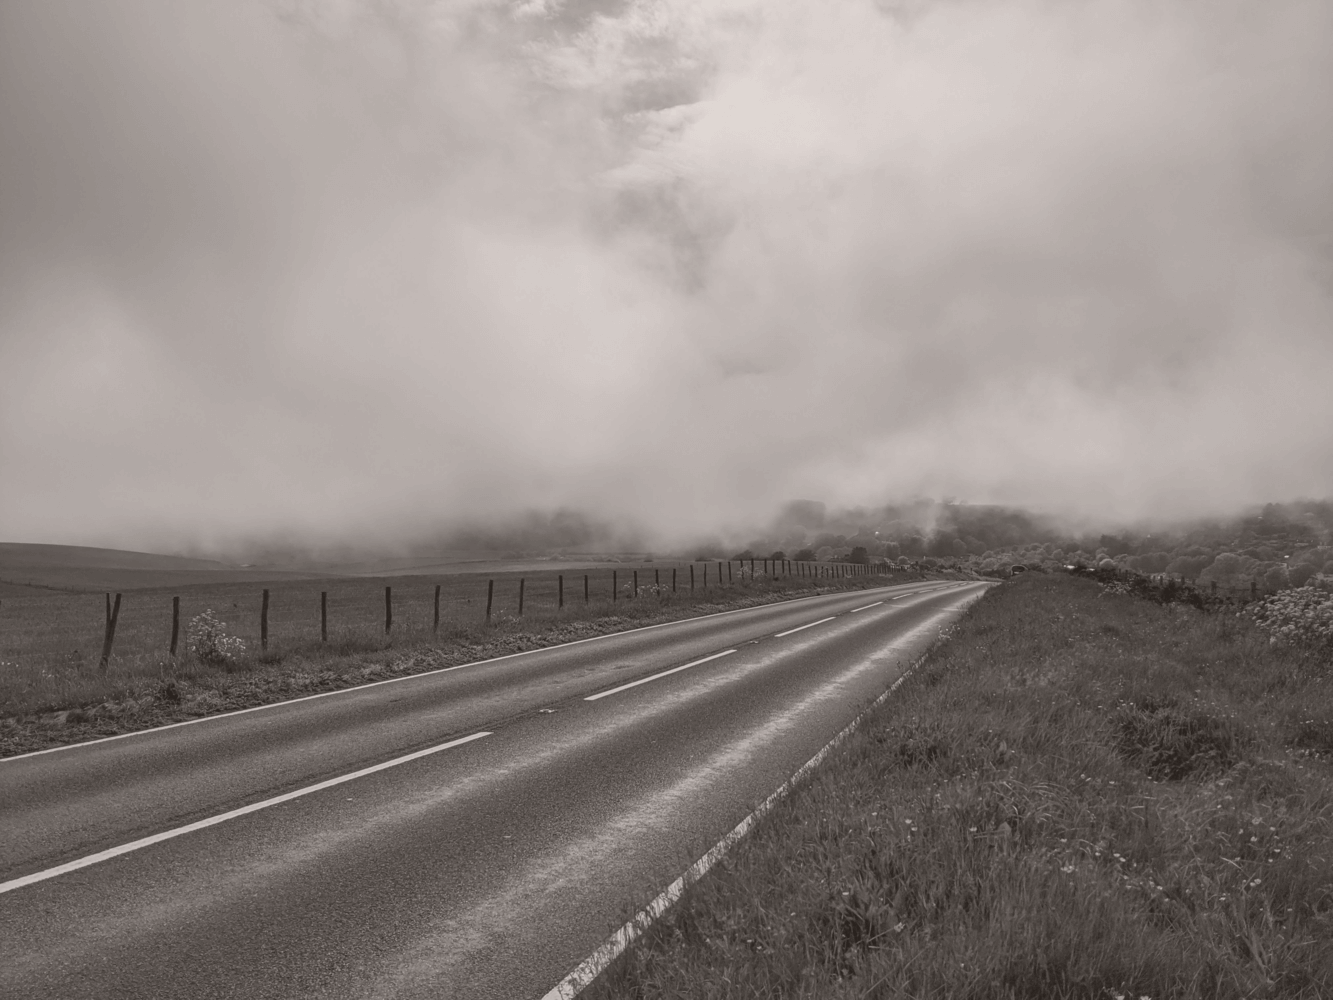 Stretch of road leading to cloudy hills with houses in the horizon